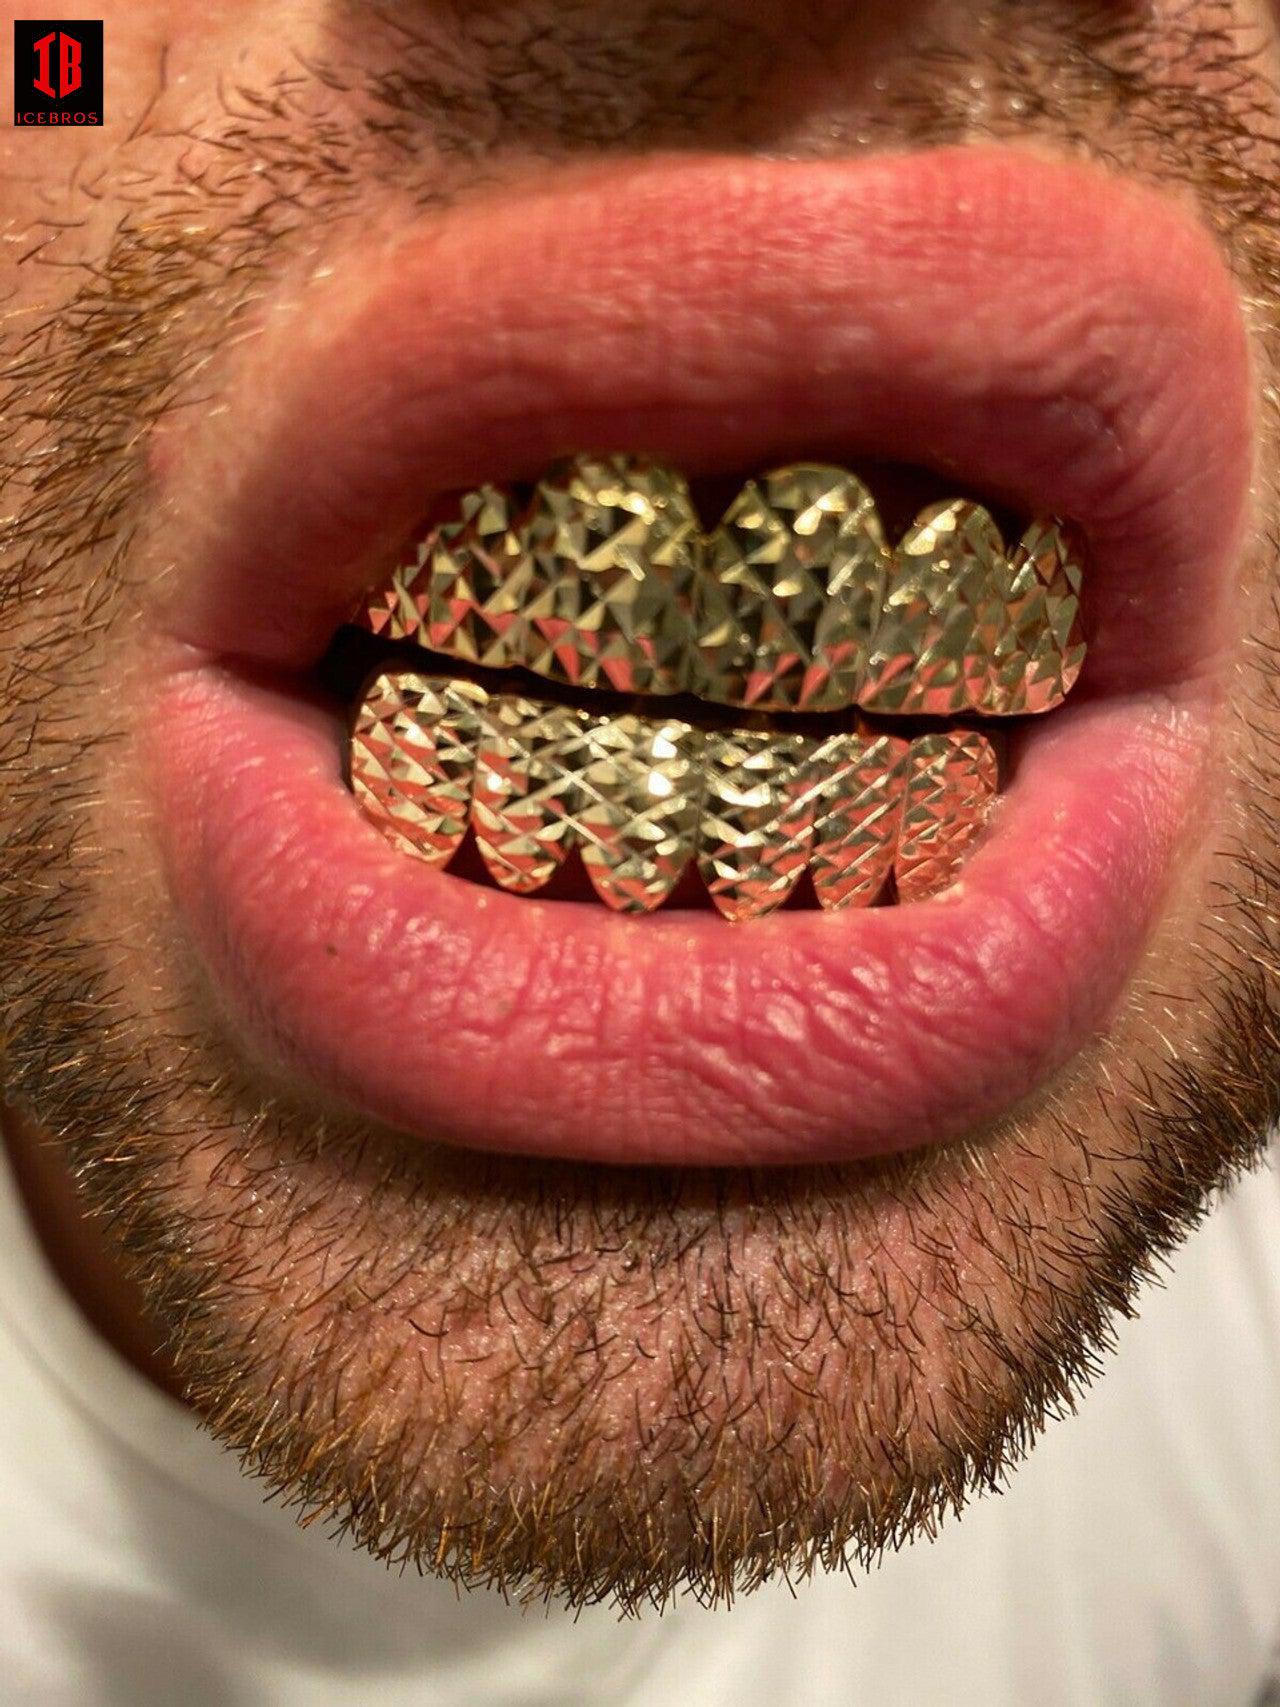 14k Gold Over Solid 925 Sterling Silver Diamond Cut Grillz Teeth Fronts